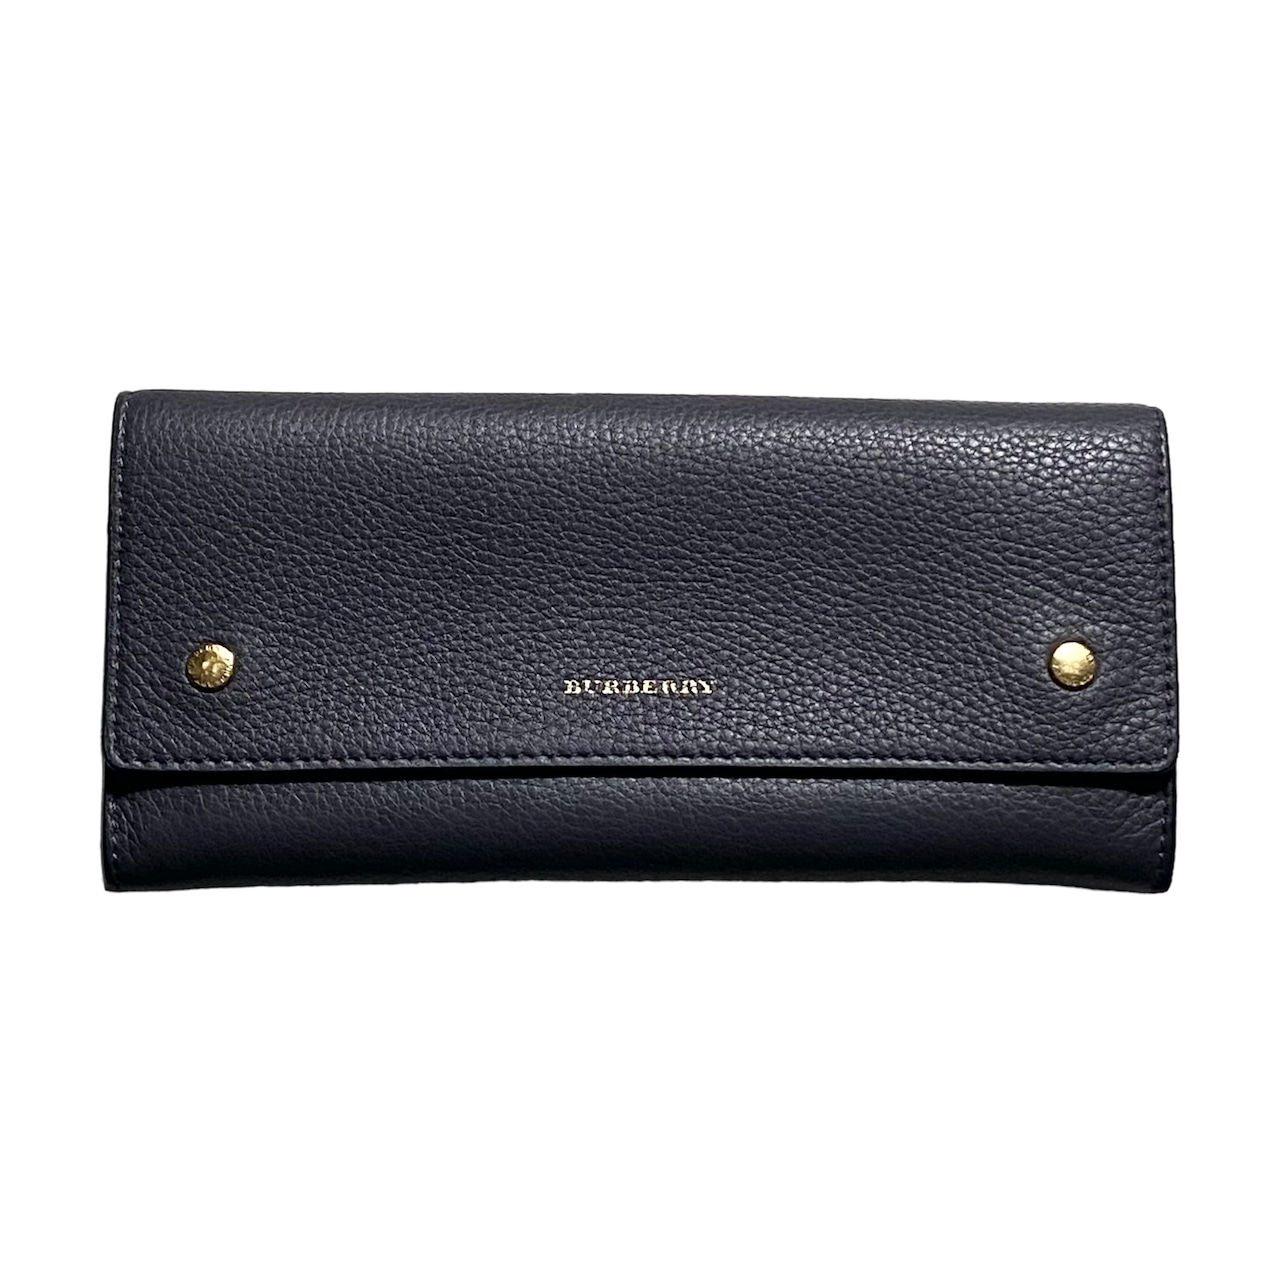 BURBERRY bicolor leather wallet